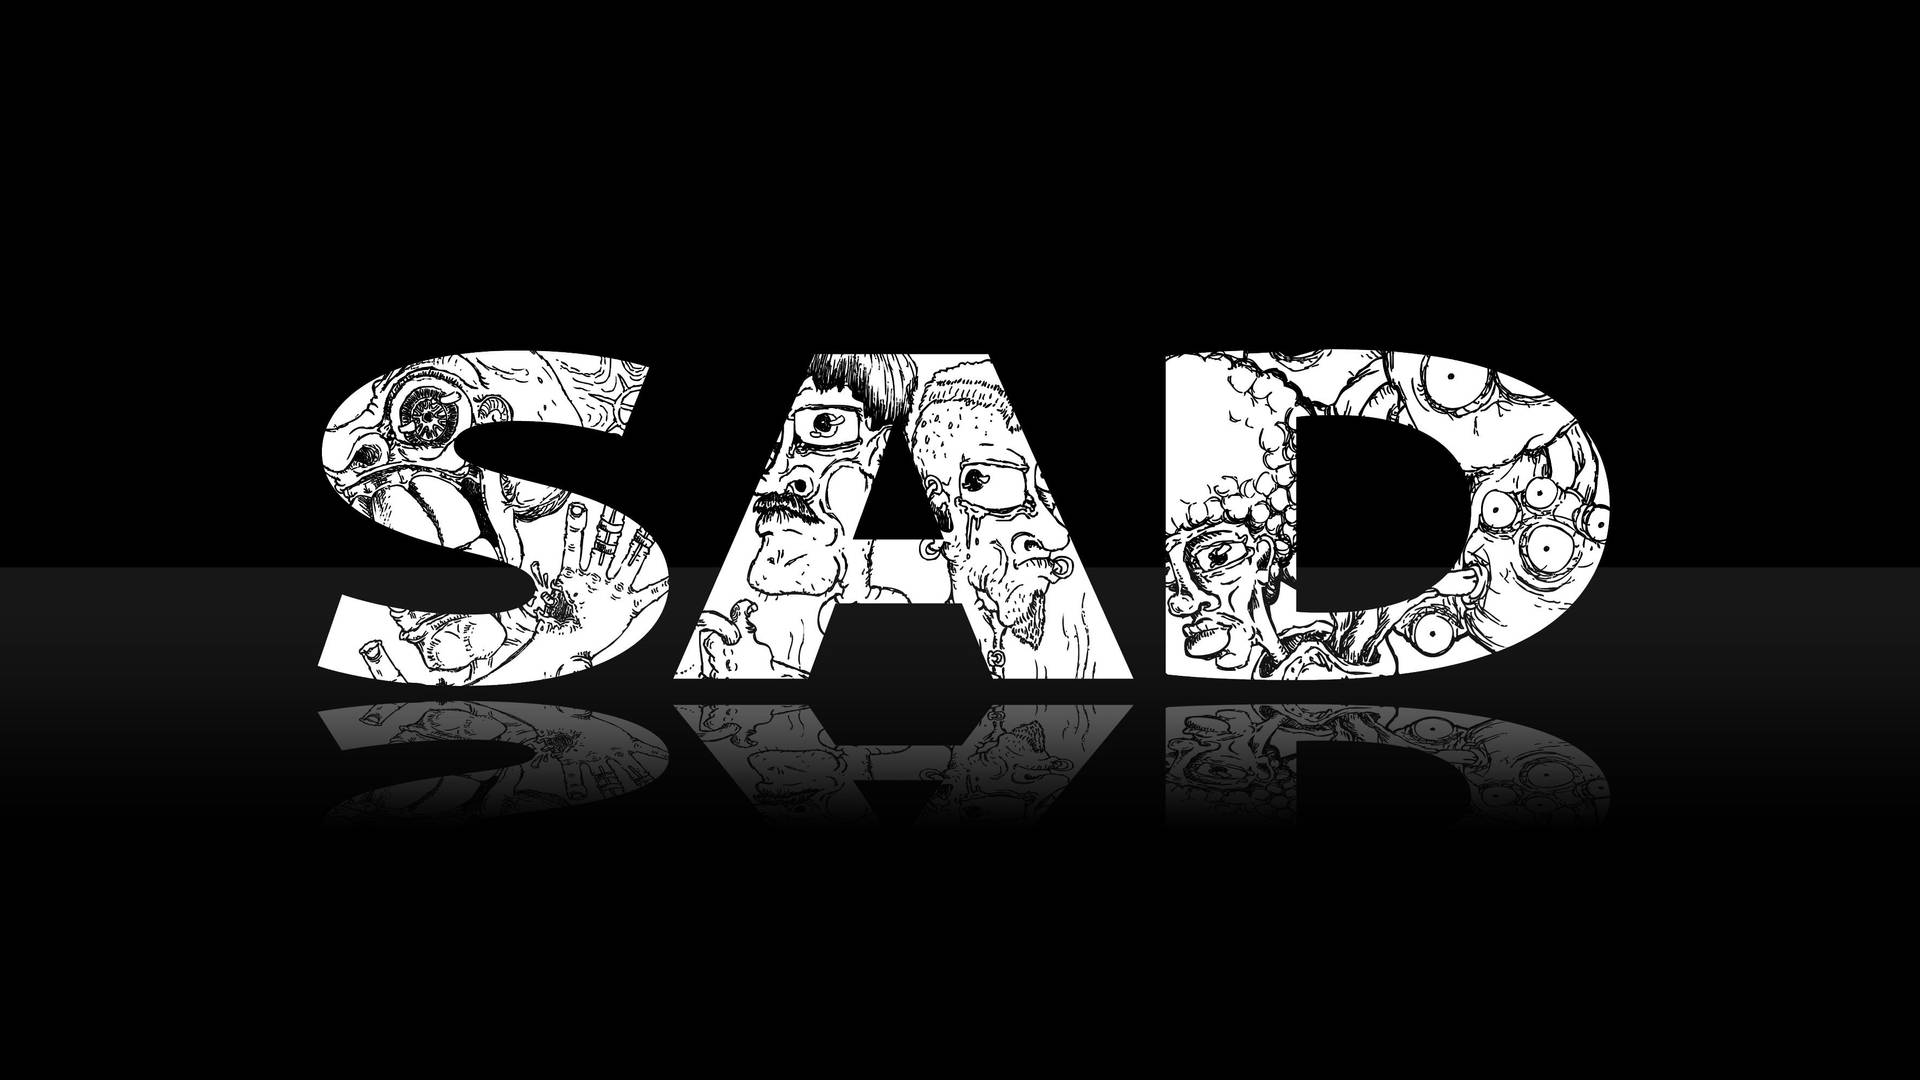 "Life can be so sad sometimes." Wallpaper